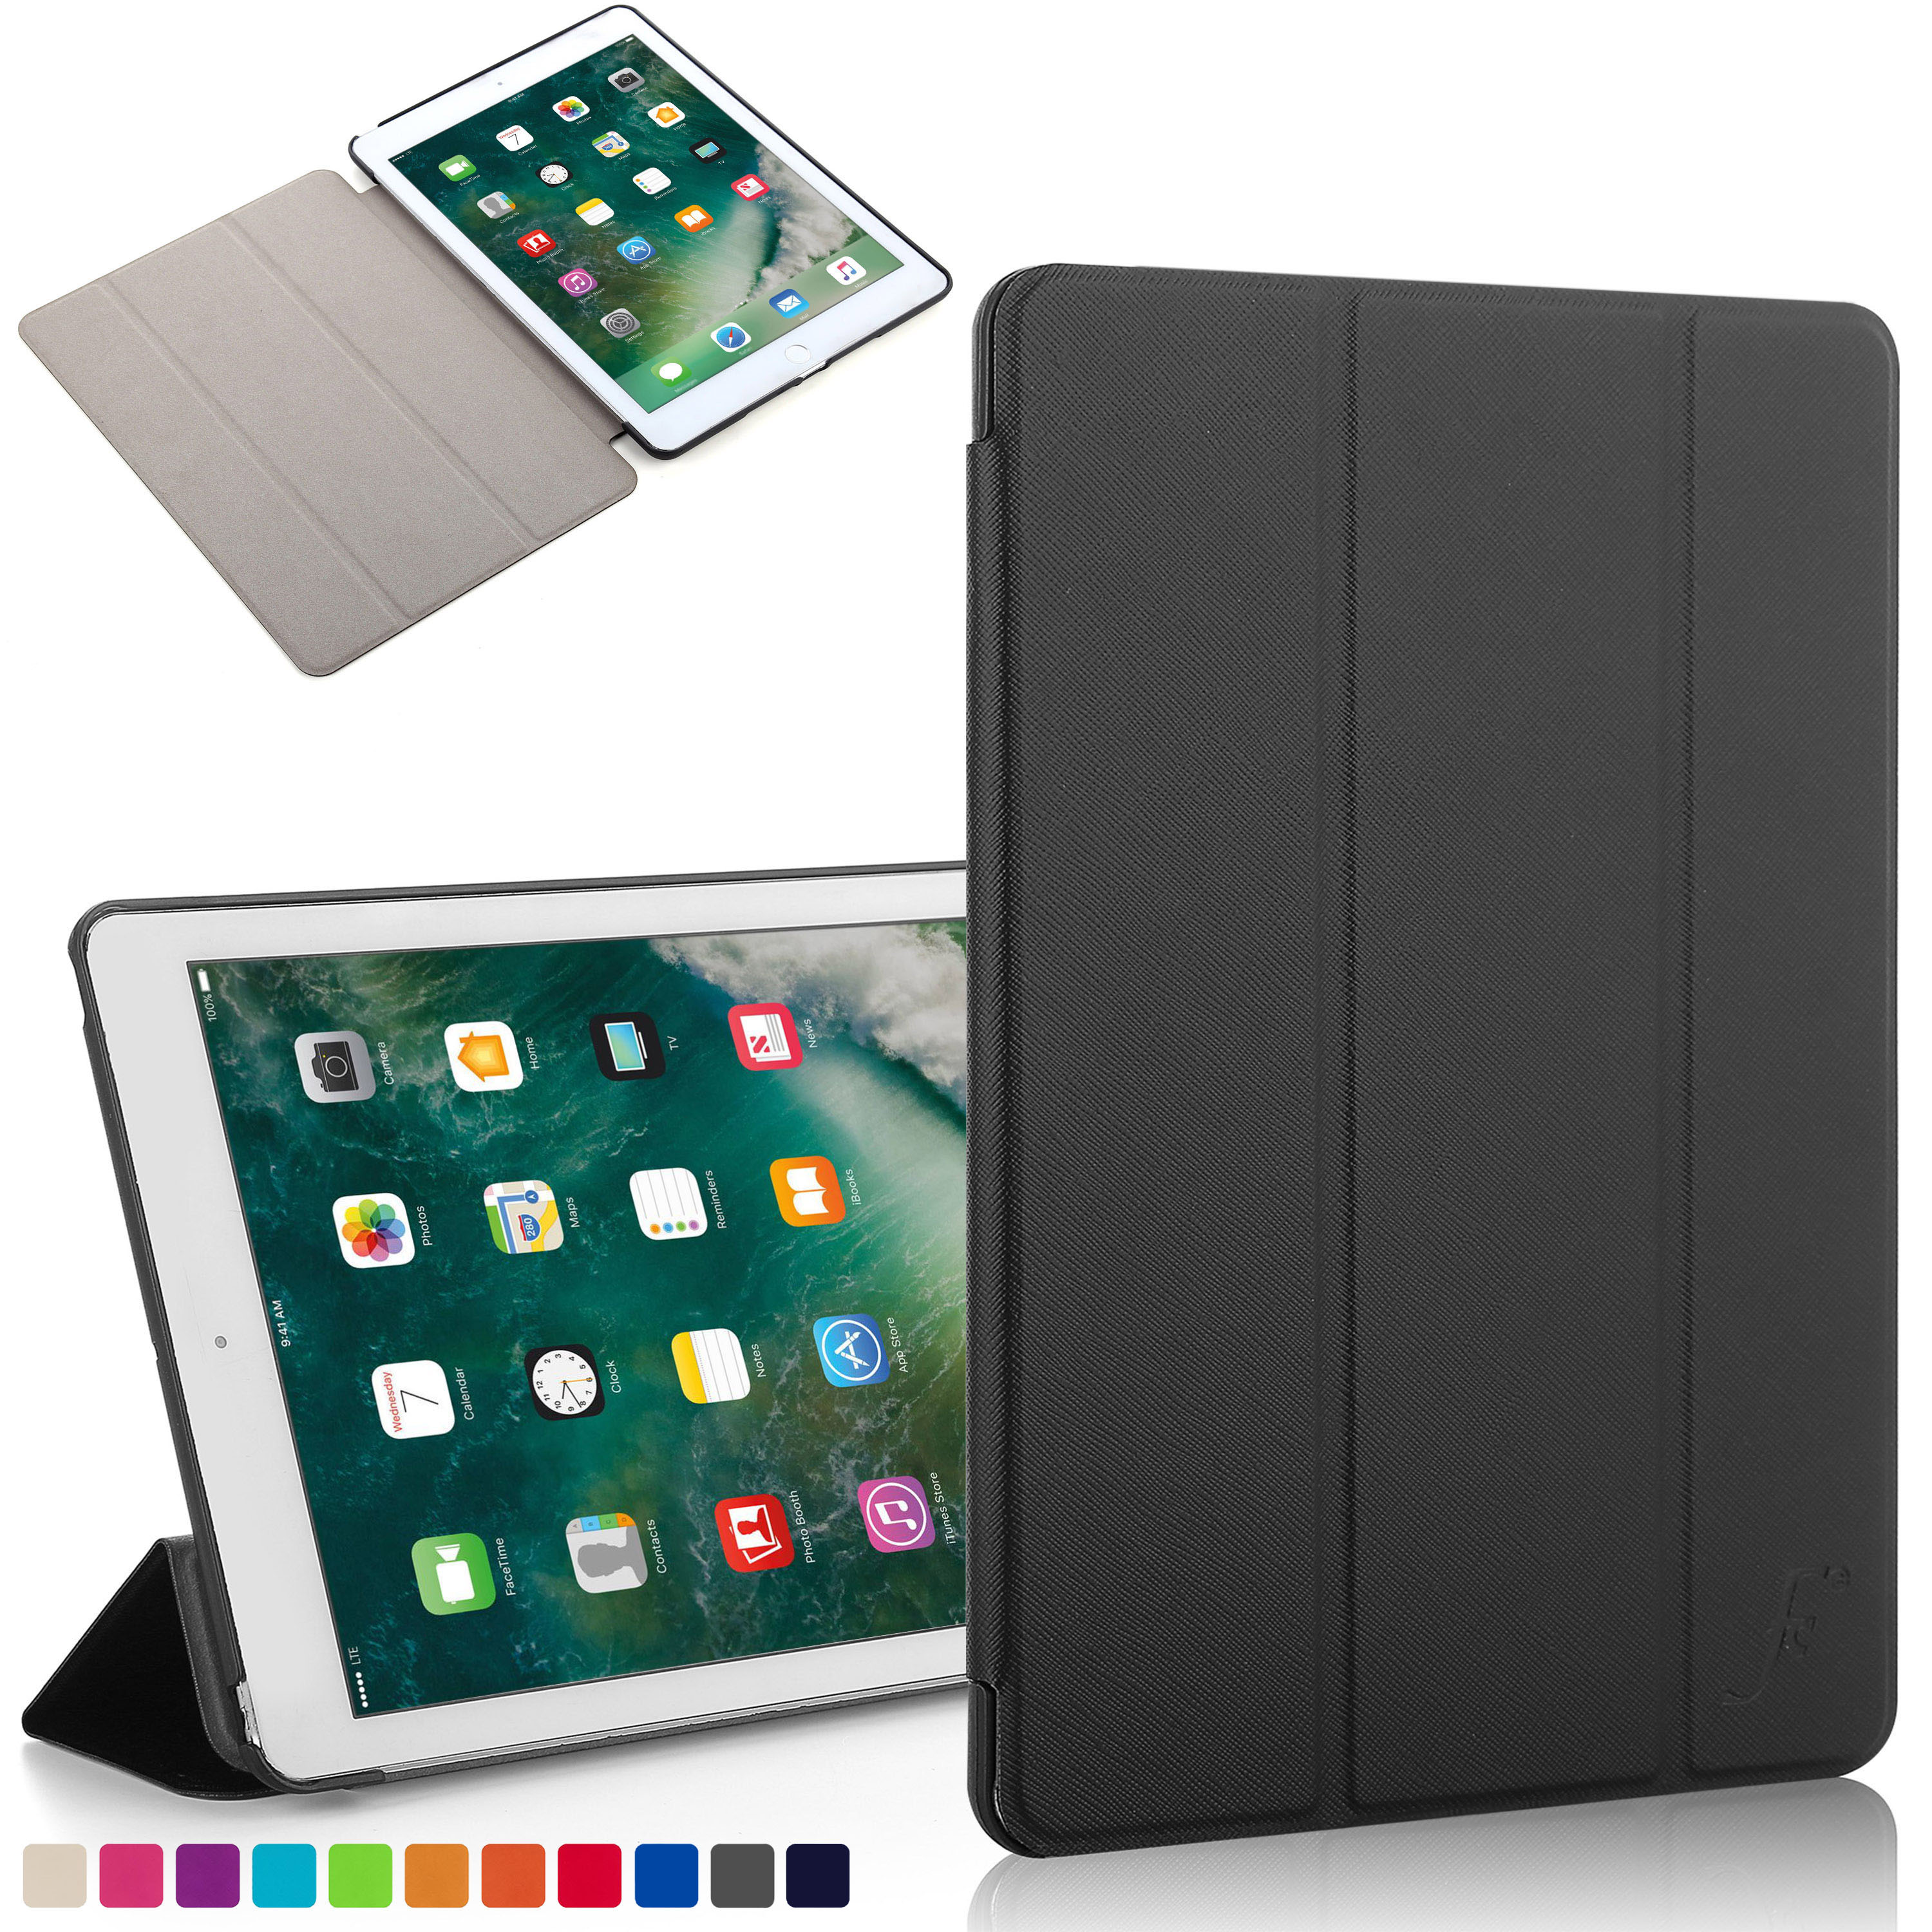 Forefront Cases® Folding Smart Case Cover Sleeve for Apple iPad 9.7 2017 A1822 eBay